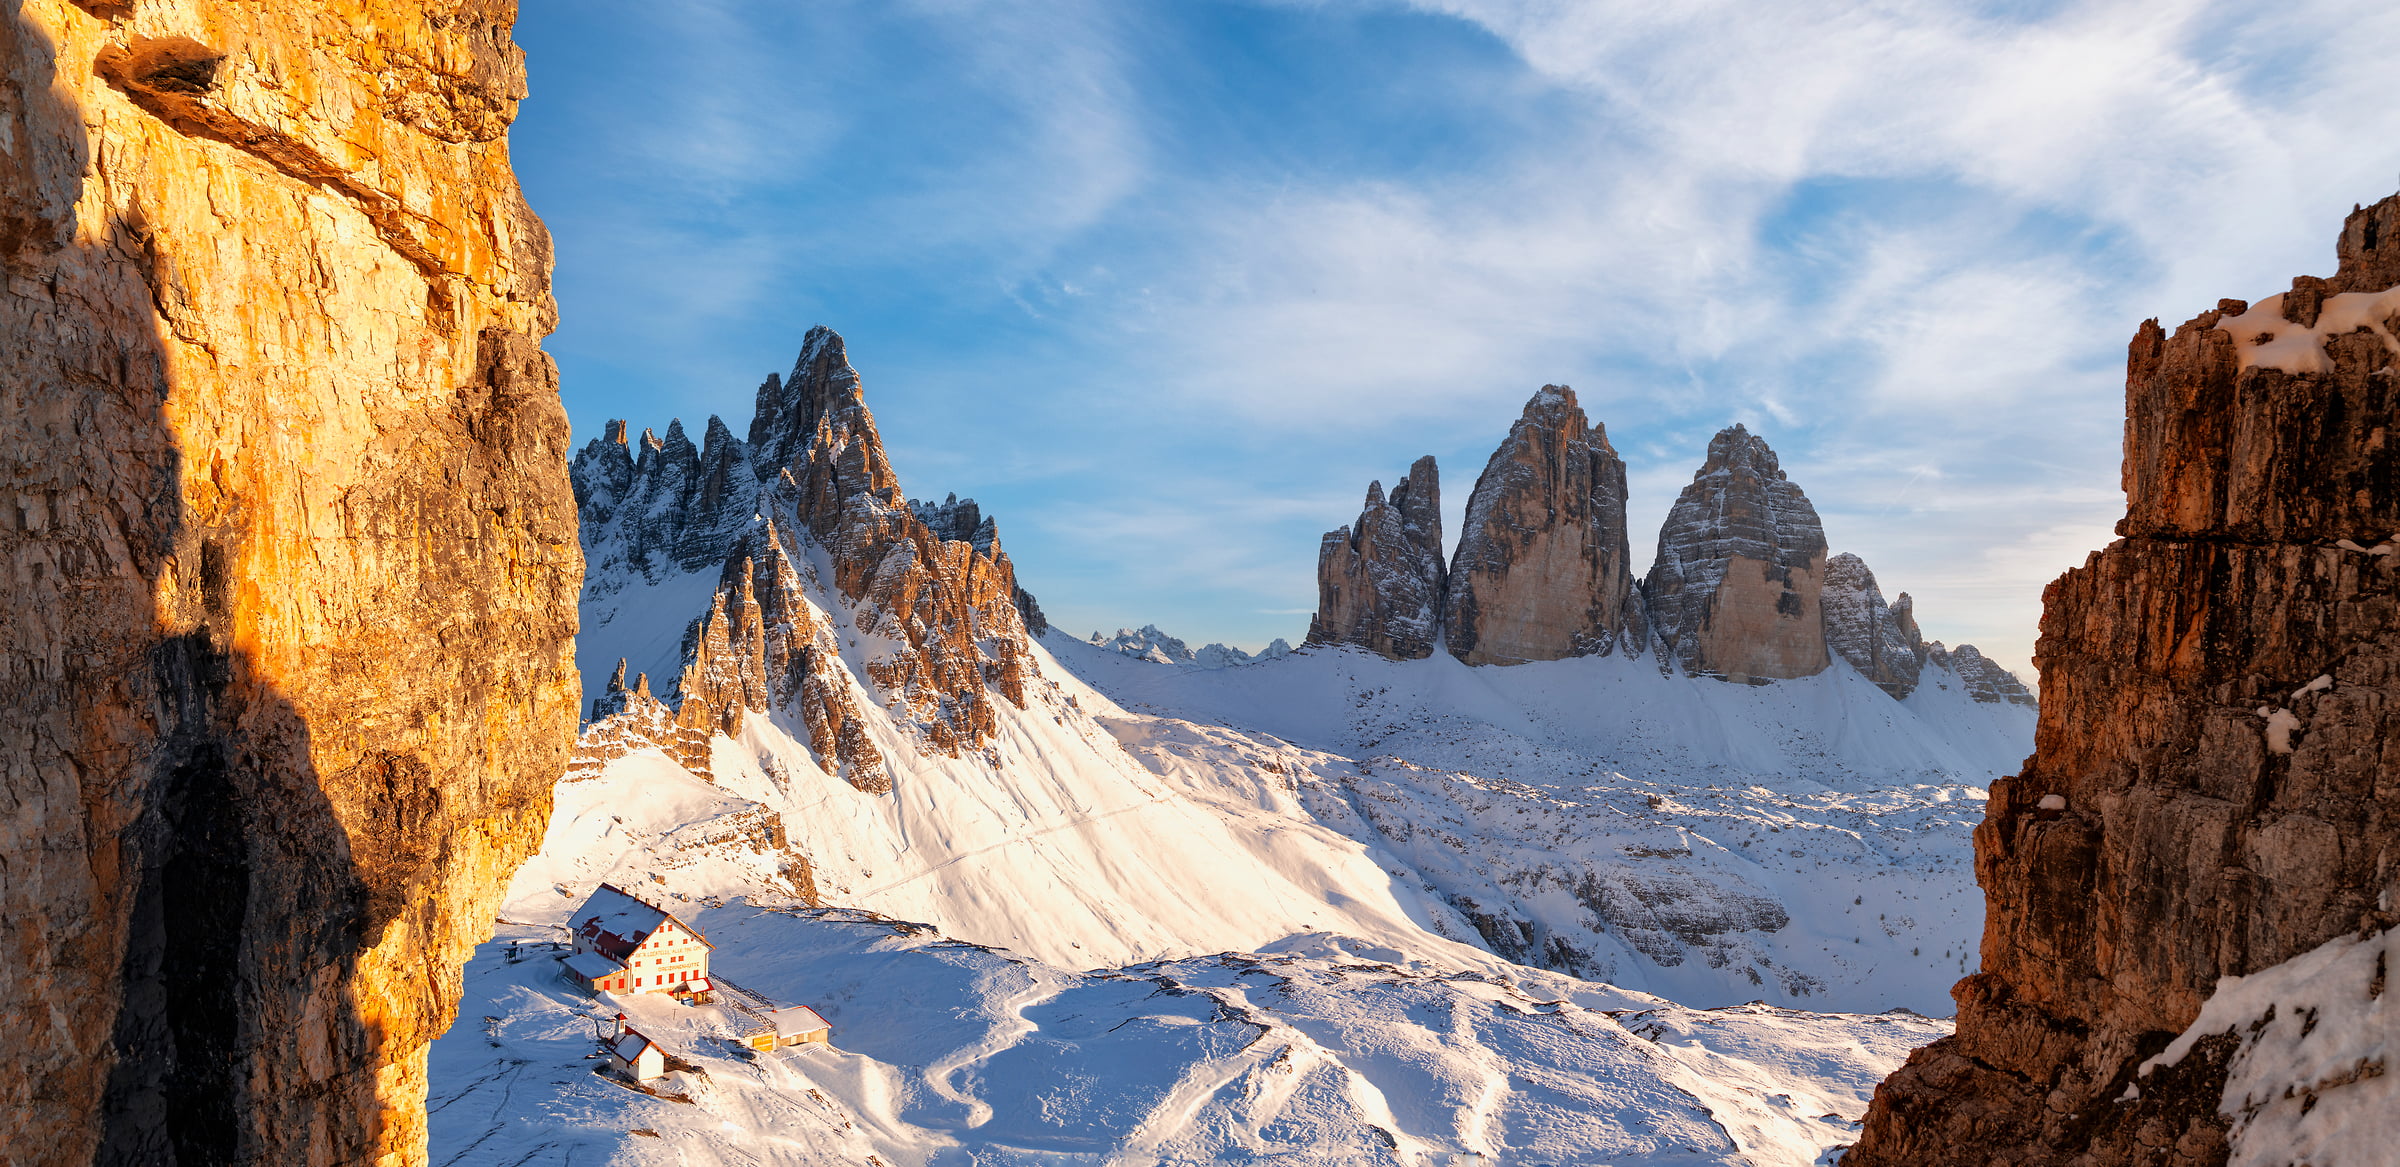 124 megapixels! A very high resolution, large-format VAST photo print of the Dolomites; landscape photograph created by Roberto Moiola in Drei Zinnen, Dolomites Unesco, Italy.